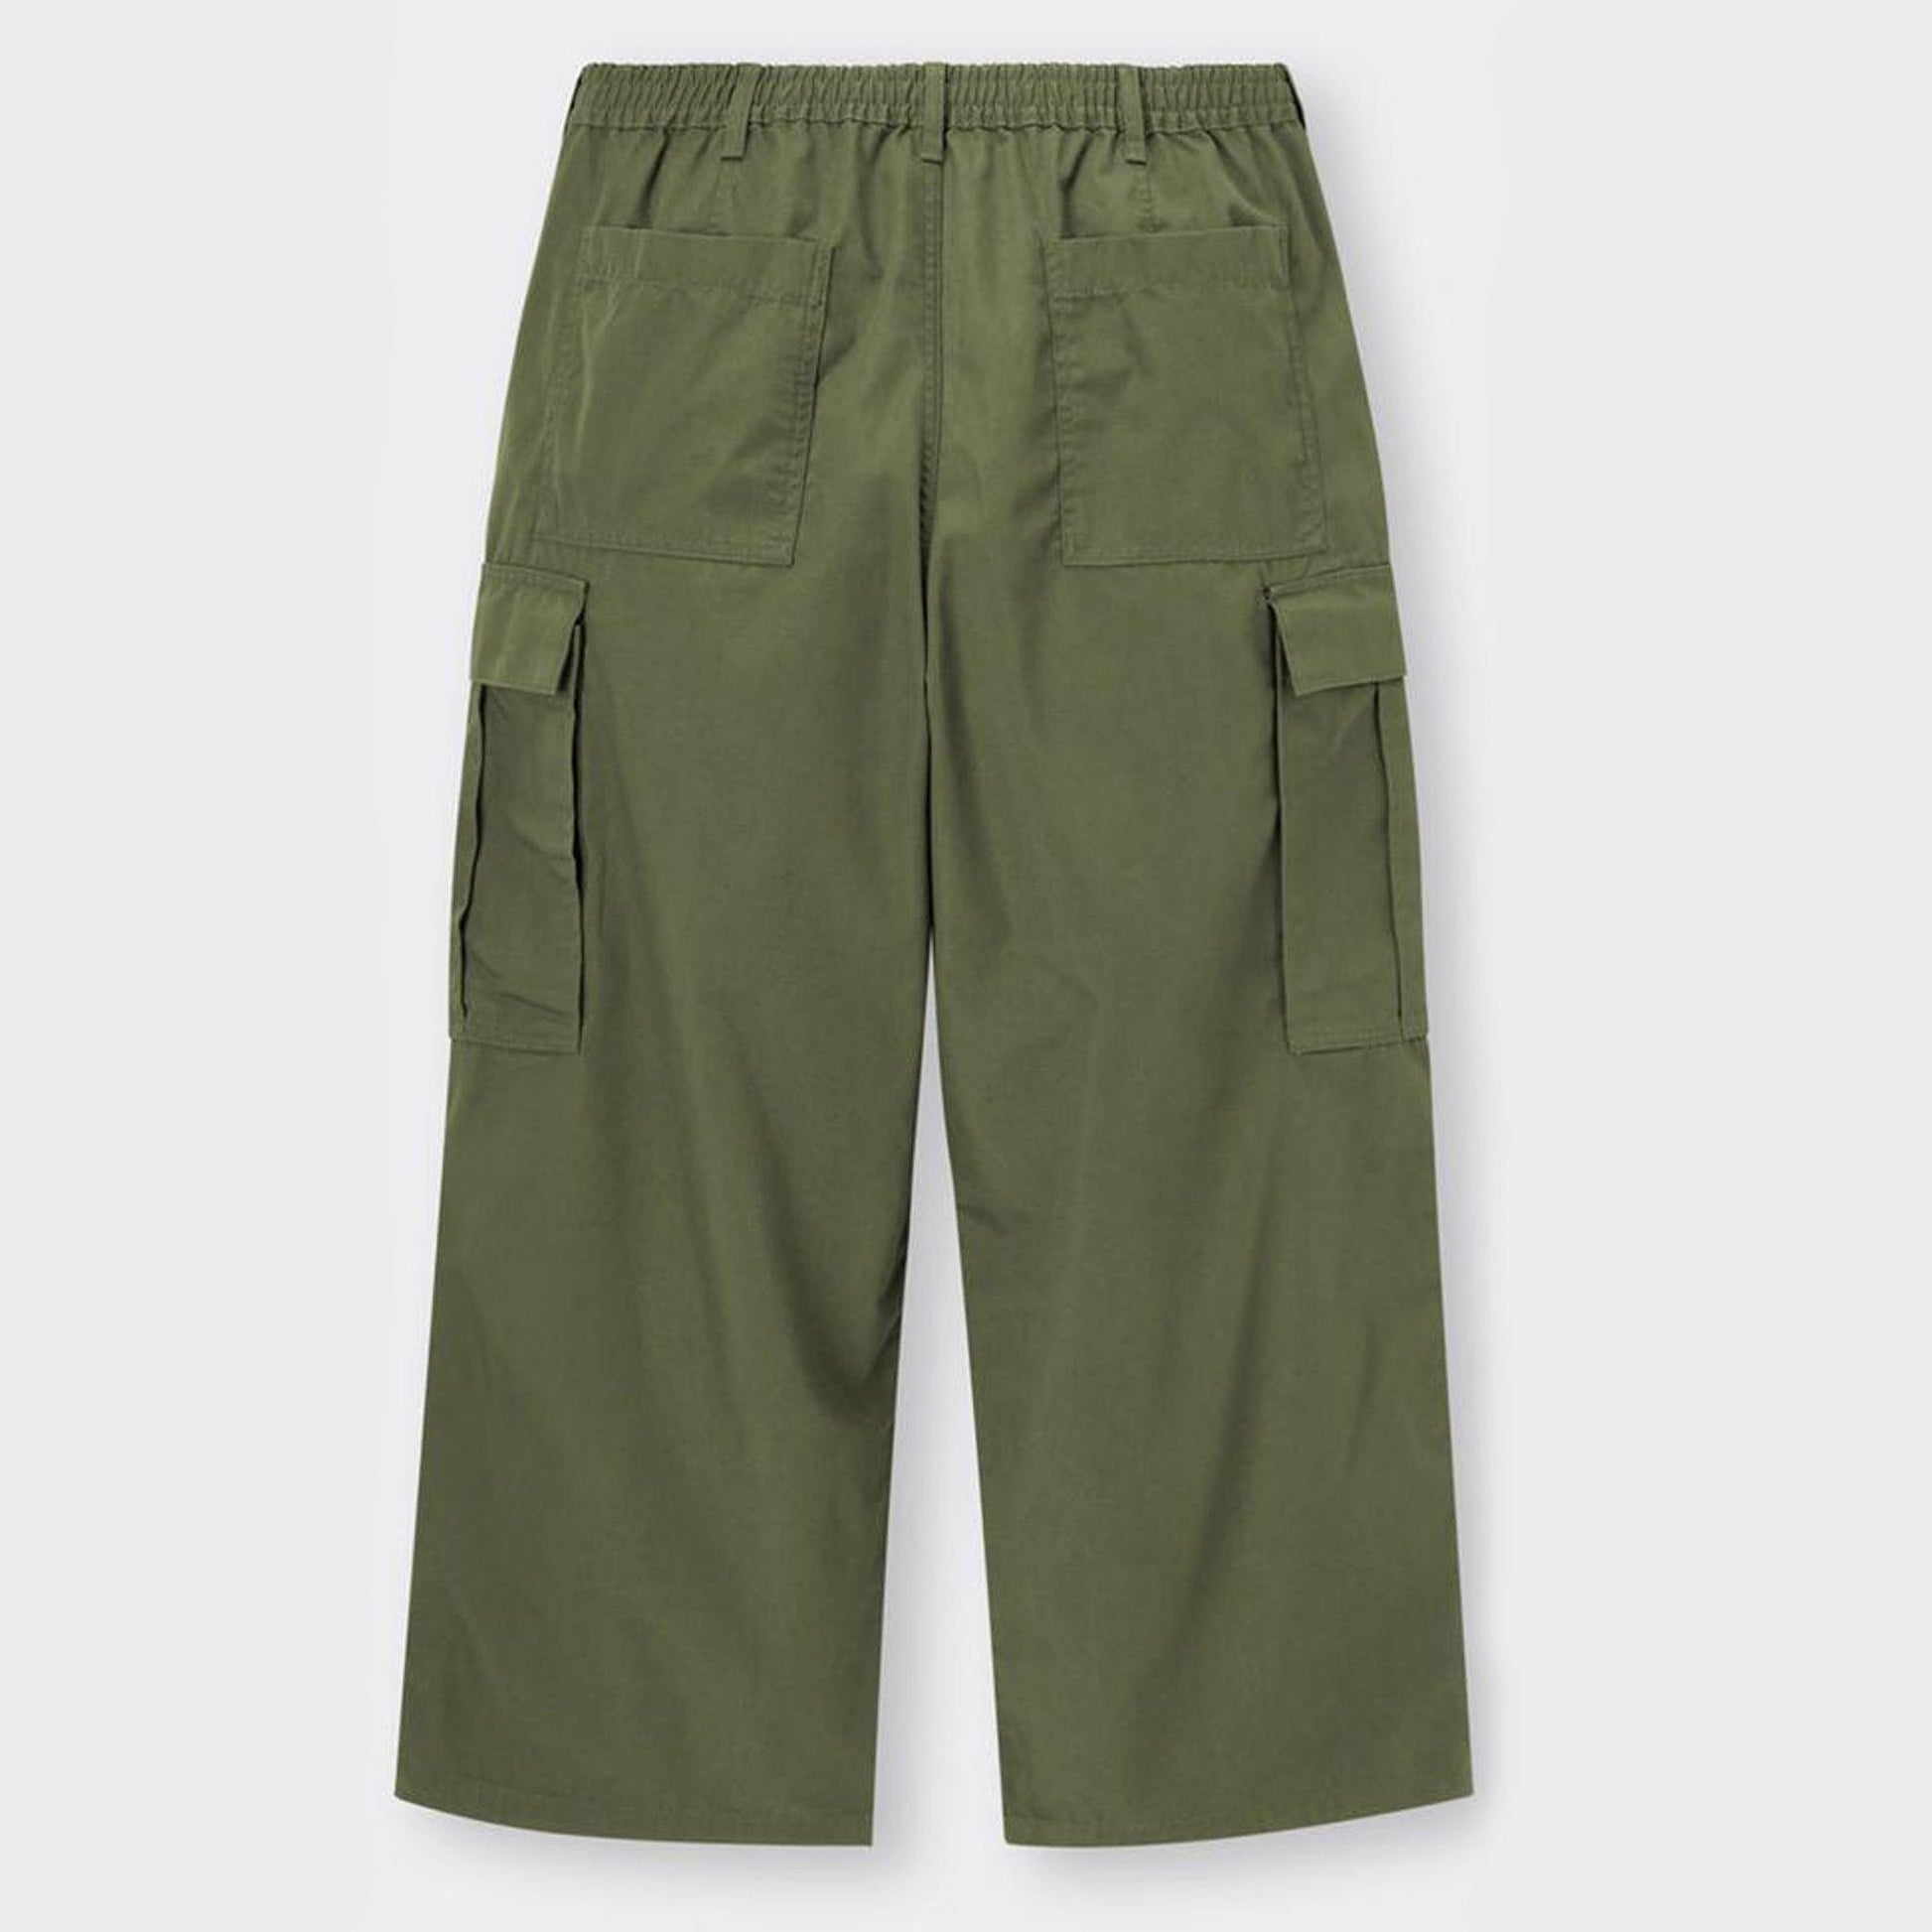 Female Parrot Green Cargo Trousers (6 pockets) – Loopster